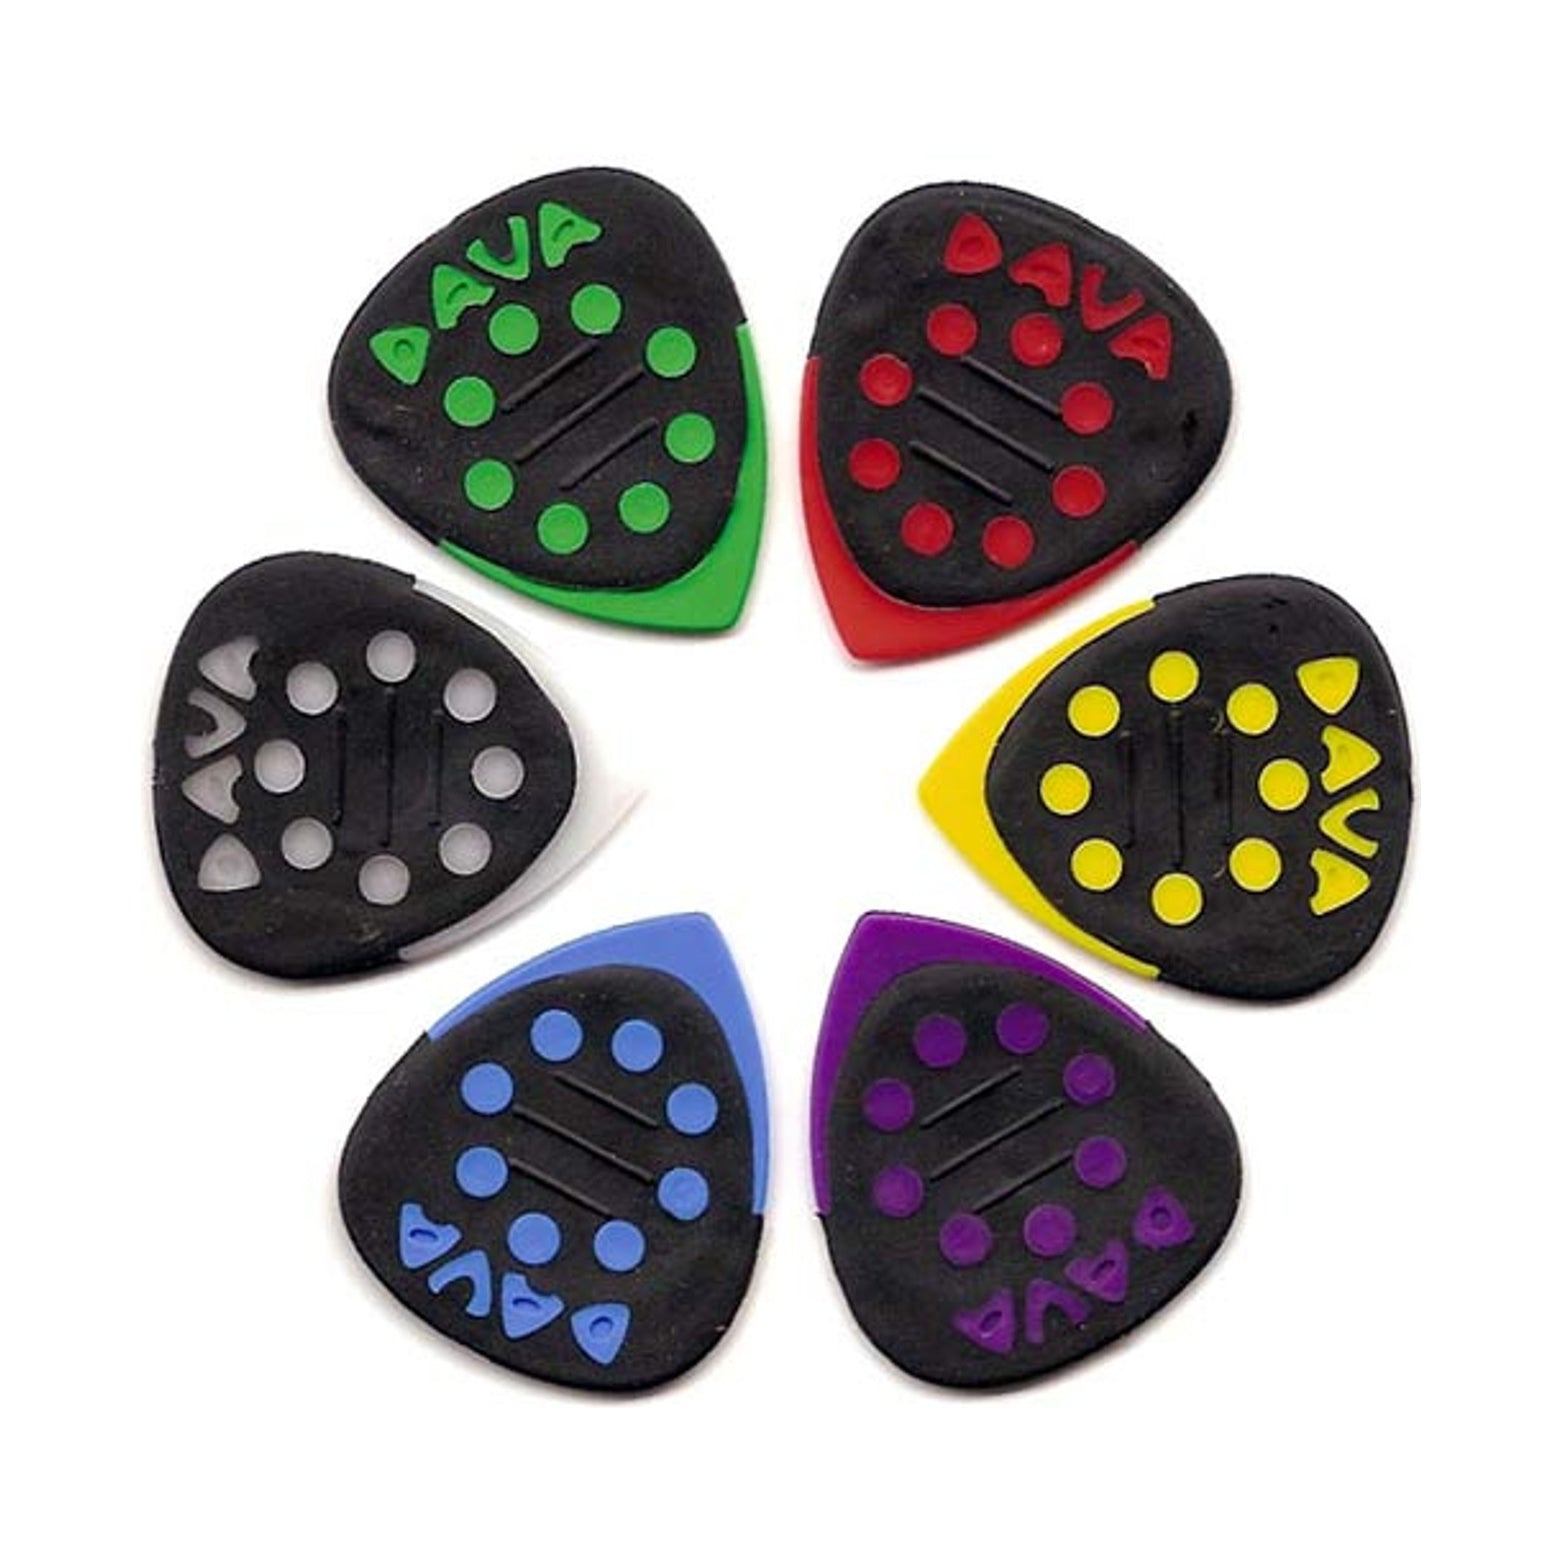 Dava Control Grip Tip Plectrums Assorted Styles